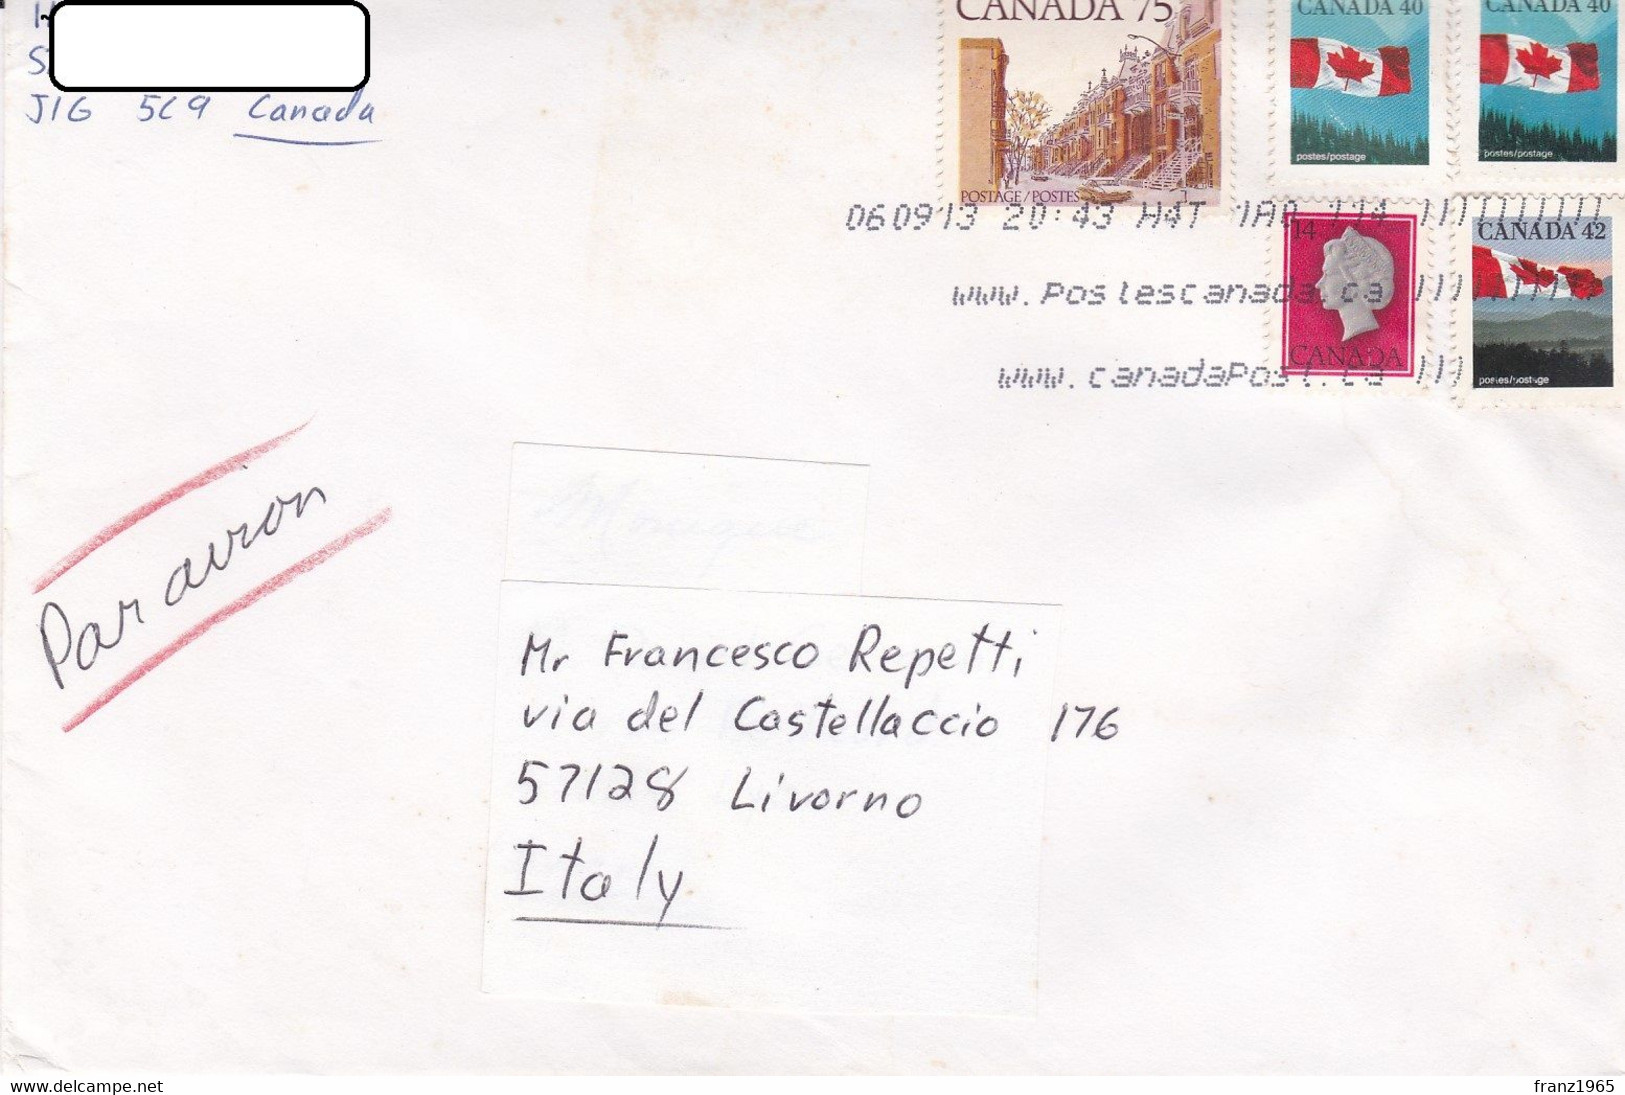 From Canada To Italy - 2013 - Postgeschiedenis